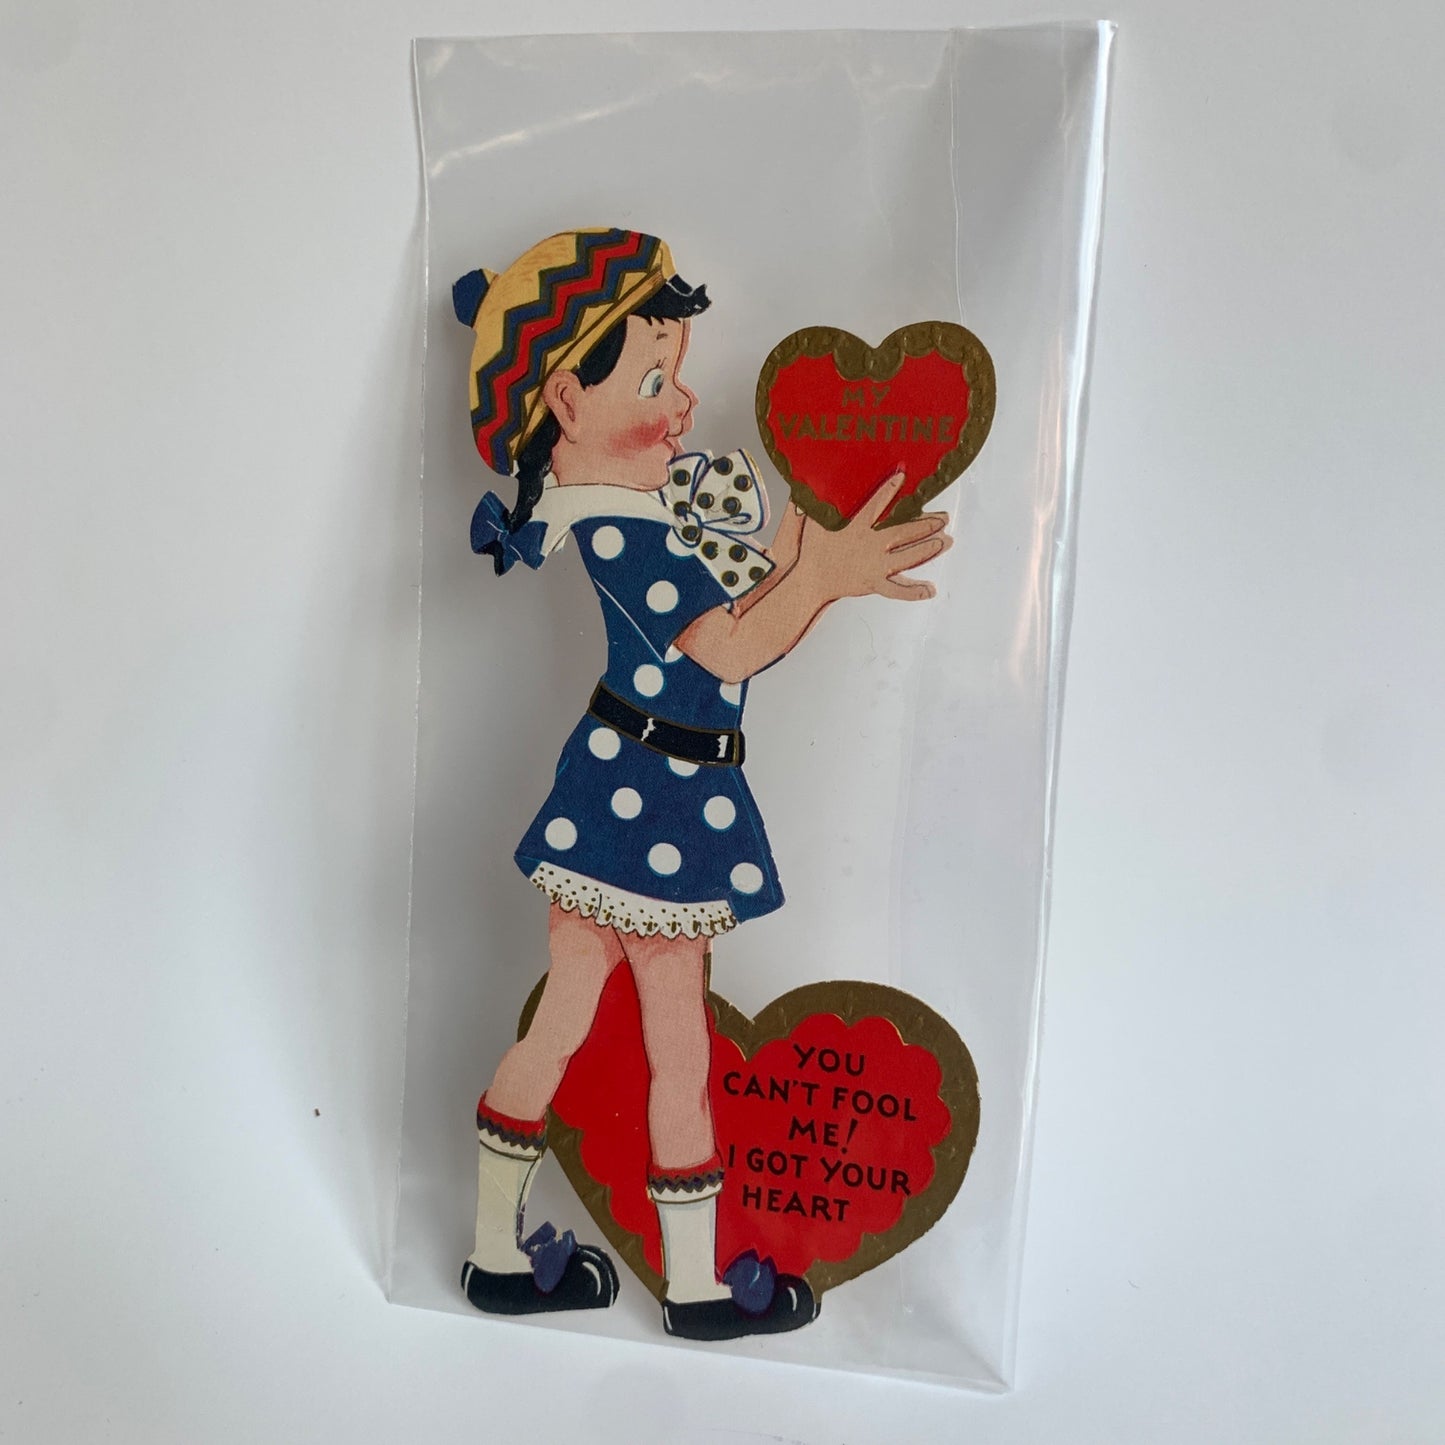 VINTAGE Valentine's Card Girl With Heart You Can't Fool Me! I Got Your Heart